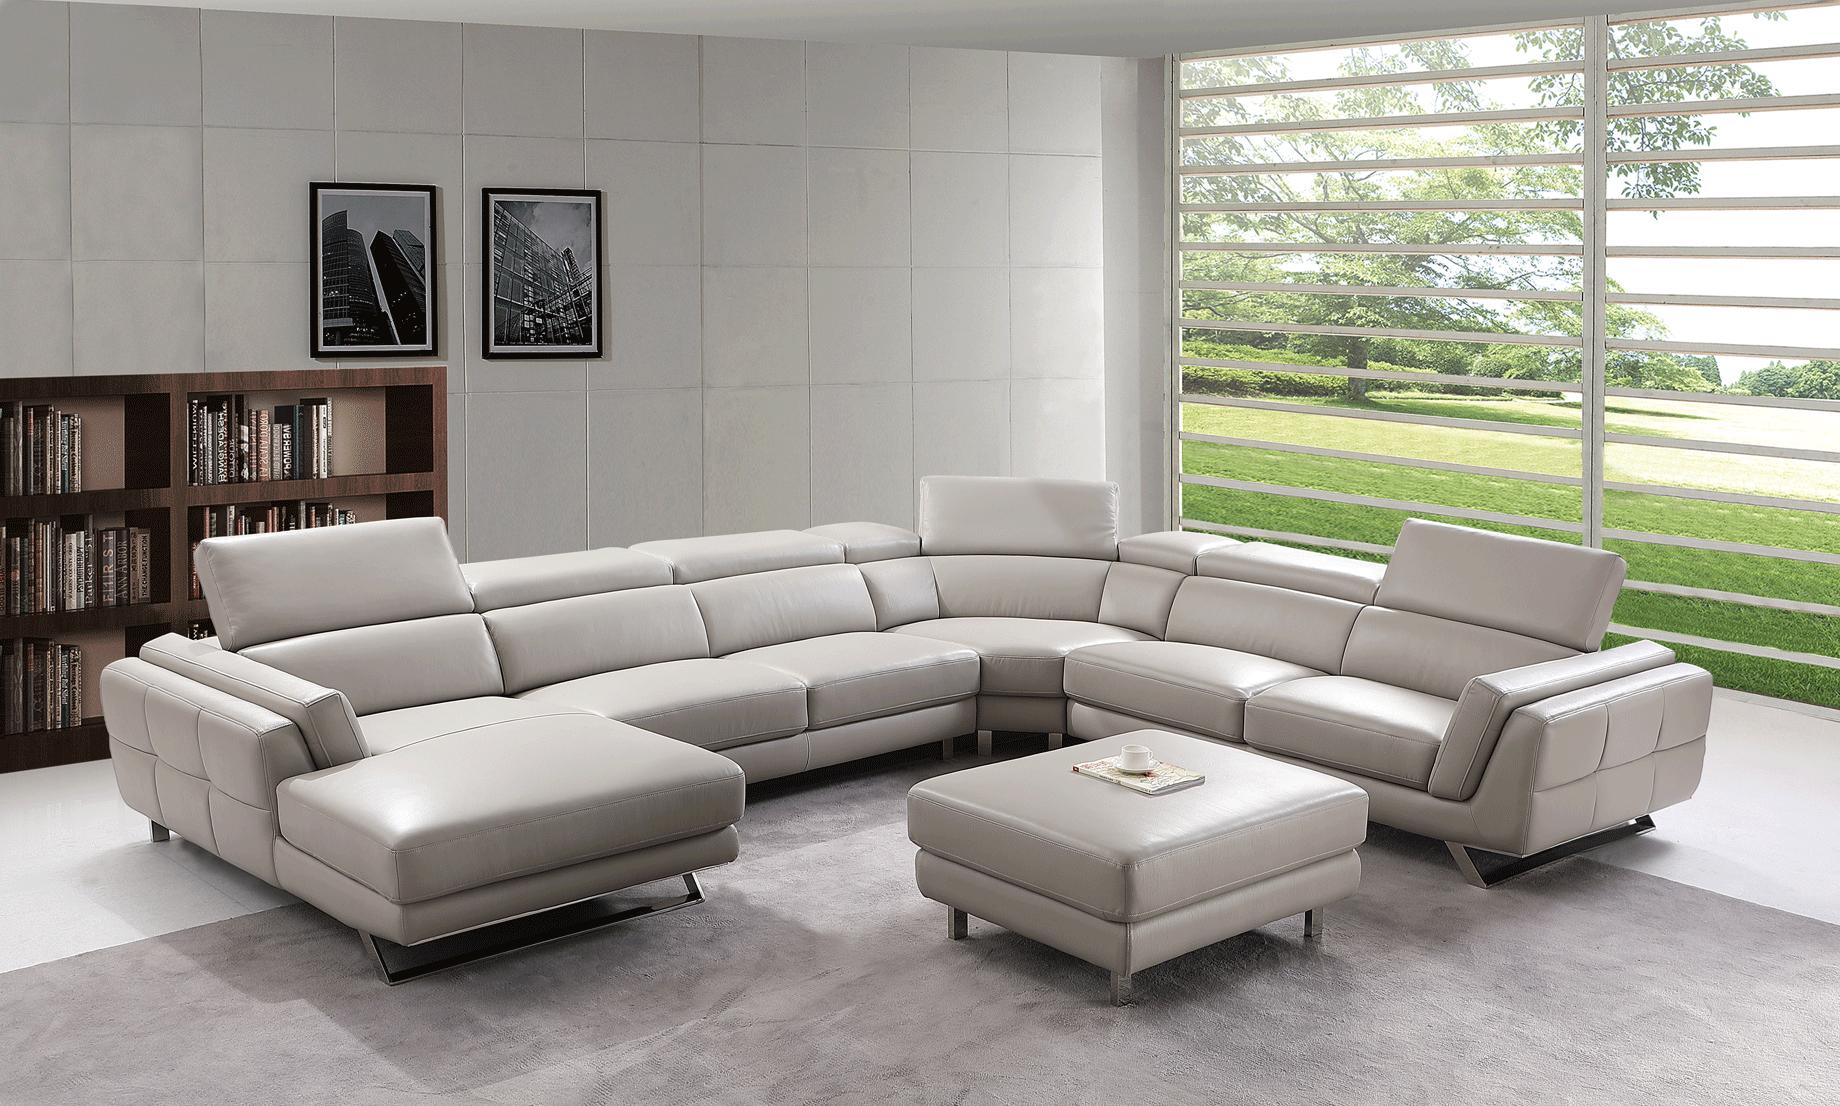 Contemporary, Modern Sectional Sofa 582 Sectional Left 582SECTIONAL in Light Gray Genuine Leather